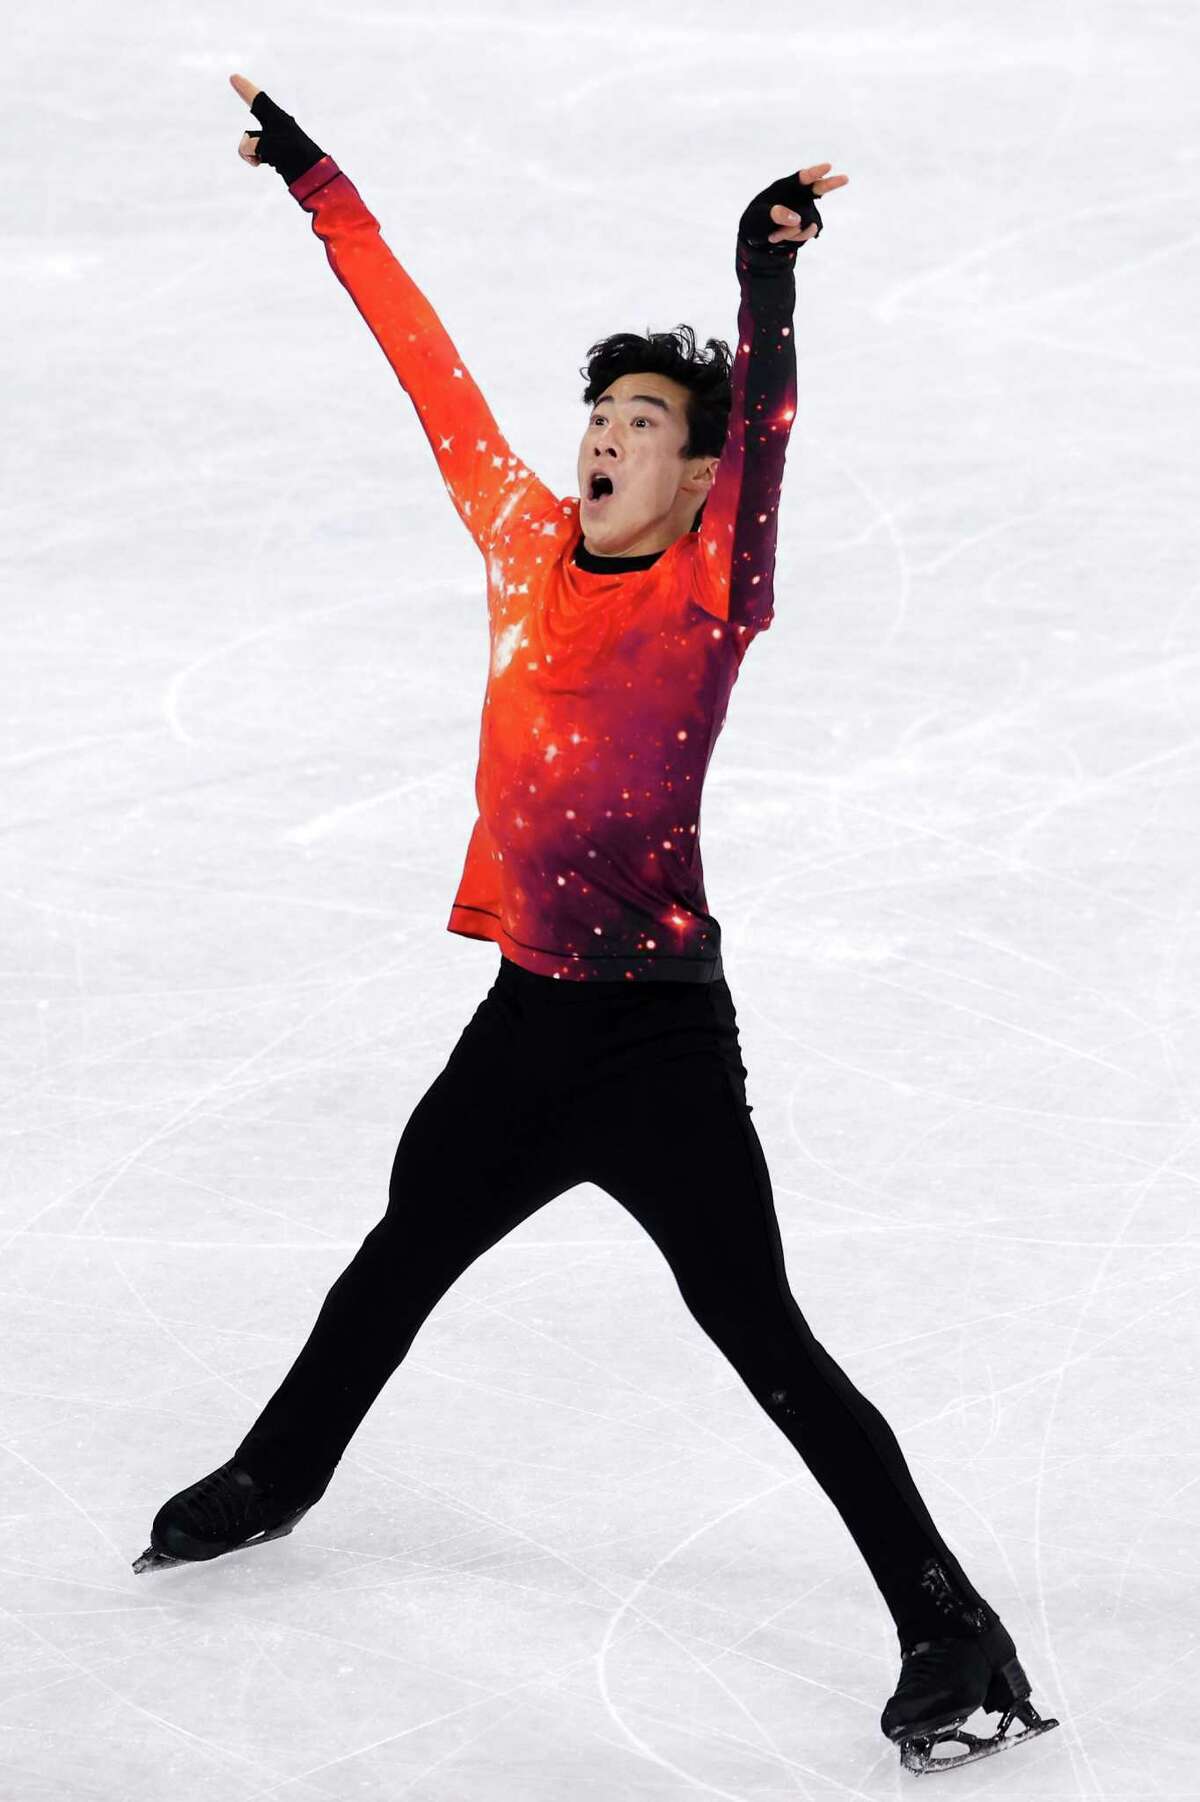 BEIJING, CHINA - FEBRUARY 10: Nathan Chen of Team United States skates during the Men Single Skating Free Skating on day six of the Beijing 2022 Winter Olympic Games at Capital Indoor Stadium on February 10, 2022 in Beijing, China. (Photo by Catherine Ivill/Getty Images)